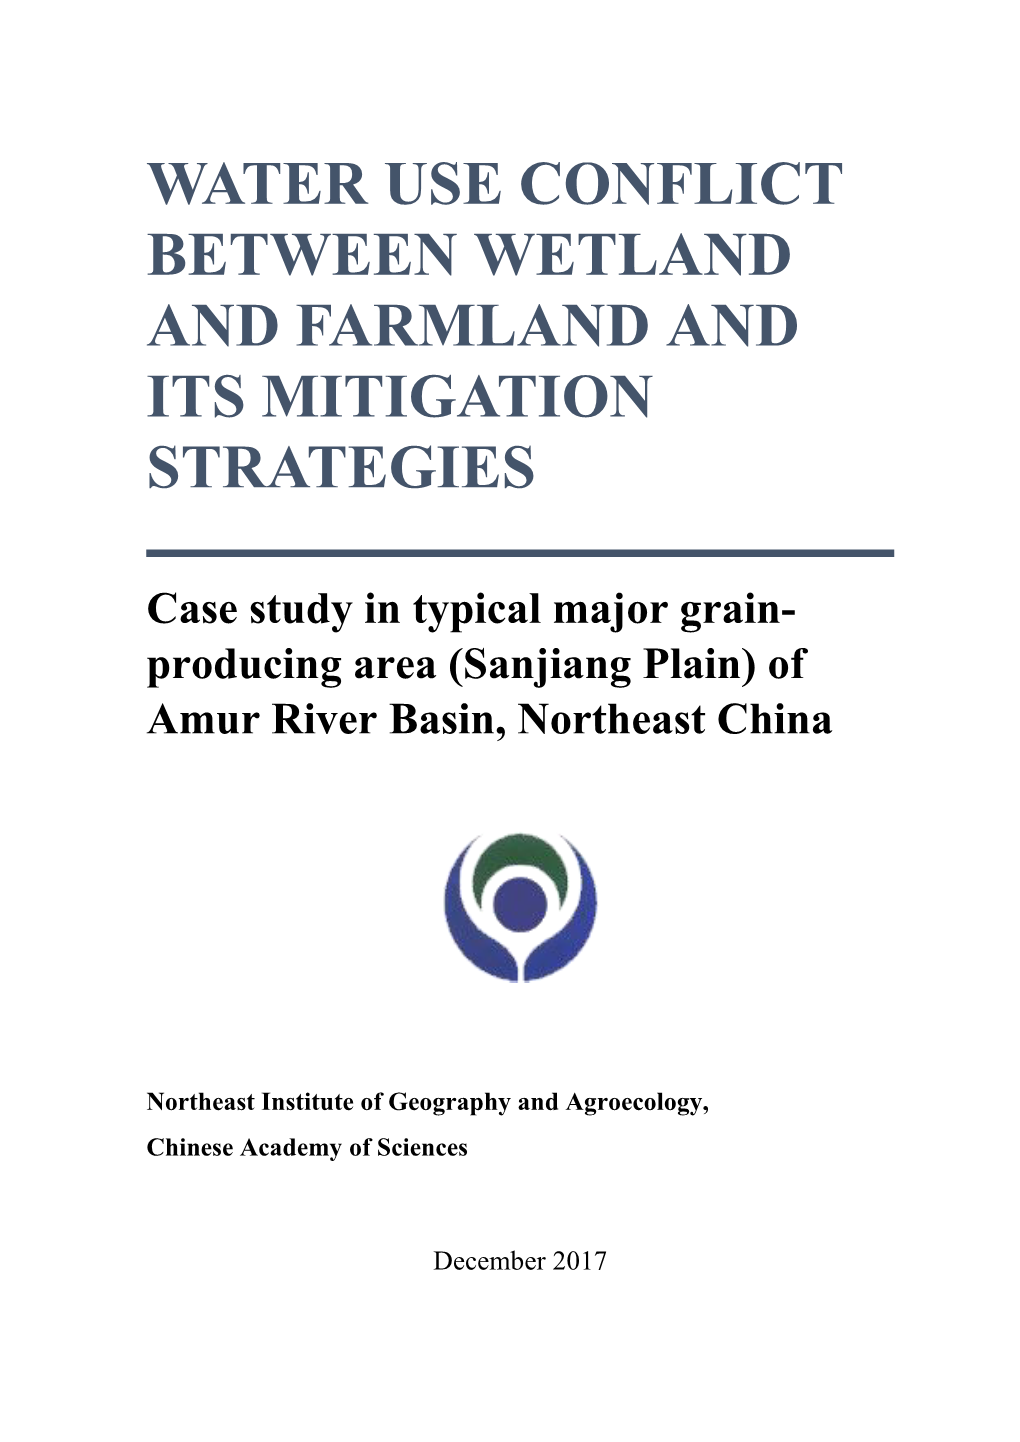 Water Use Conflict Between Wetland and Farmland and Its Mitigation Strategies